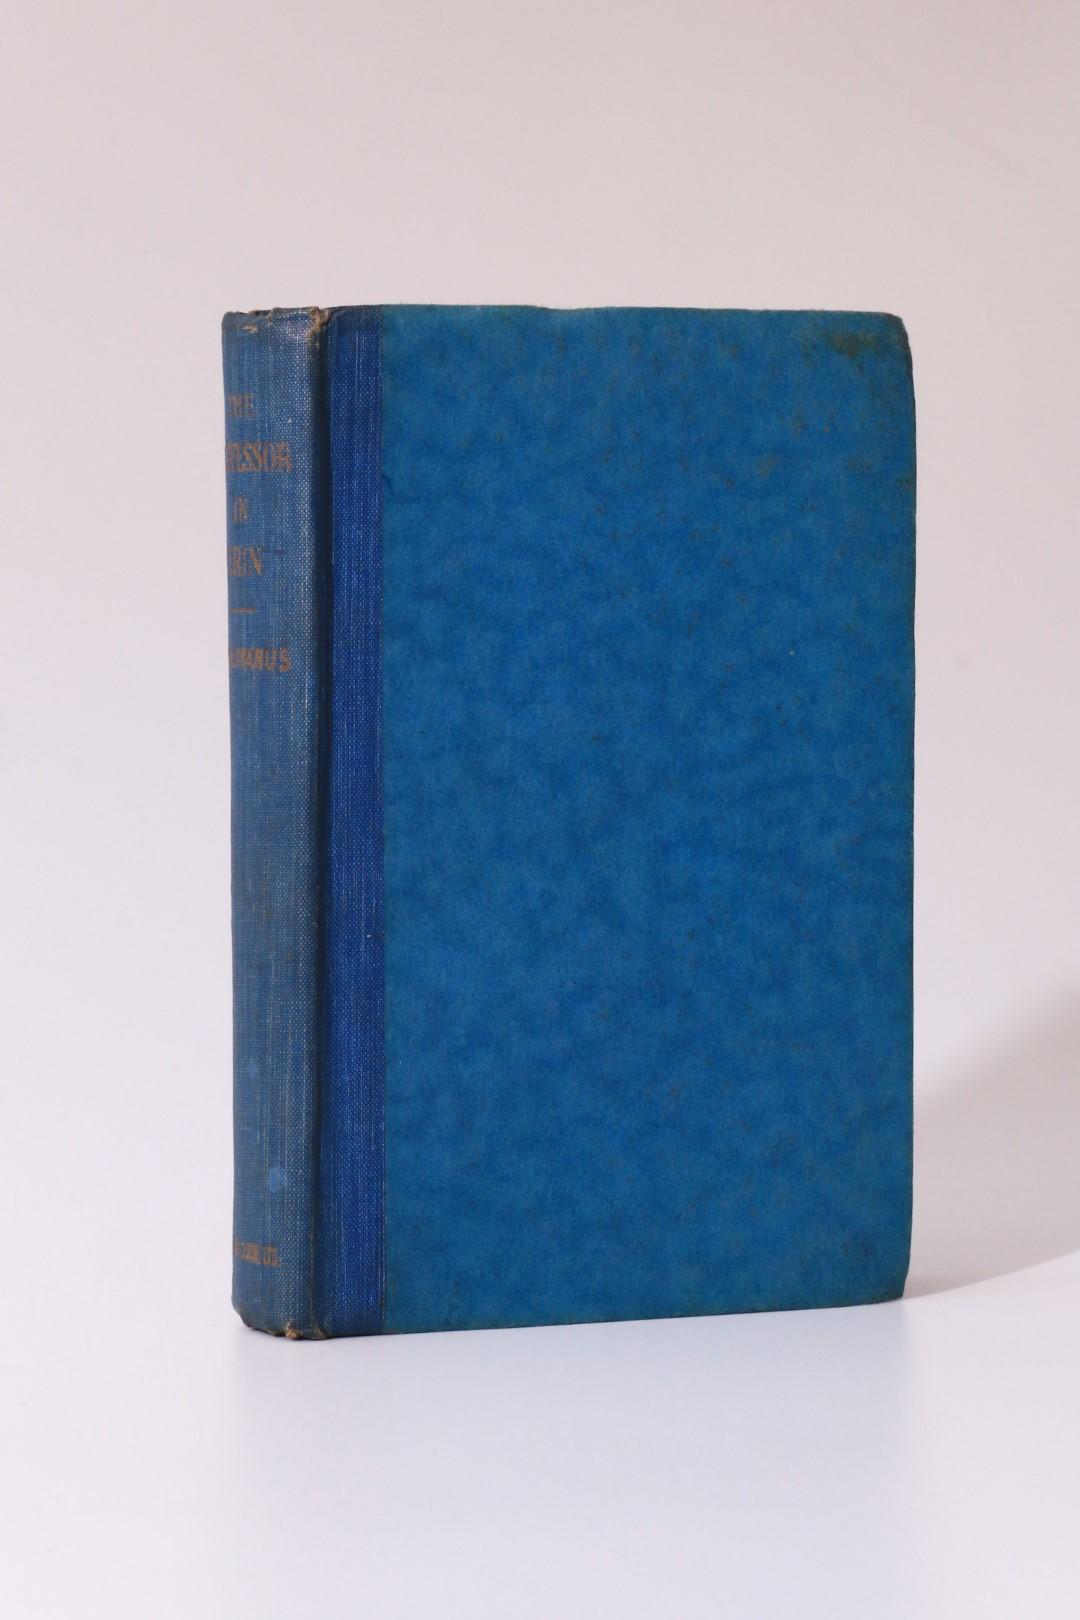 L. McManus - The Professor in Erin - M.H. Gill and Son, 1918, First Edition.